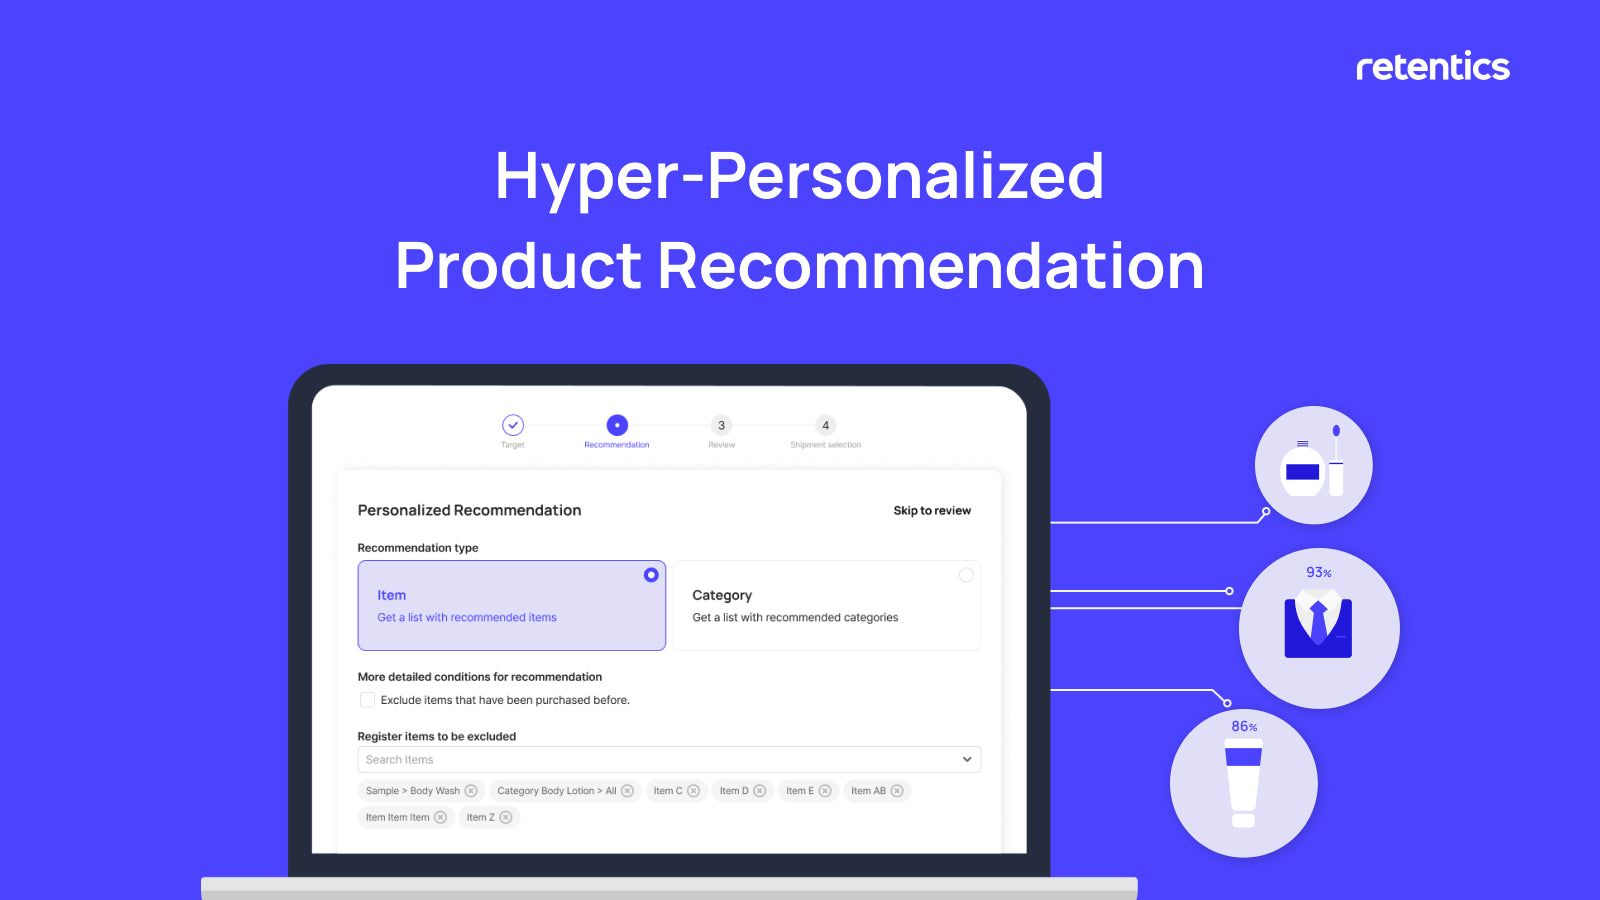 Hyper Personalized Product Recommendation